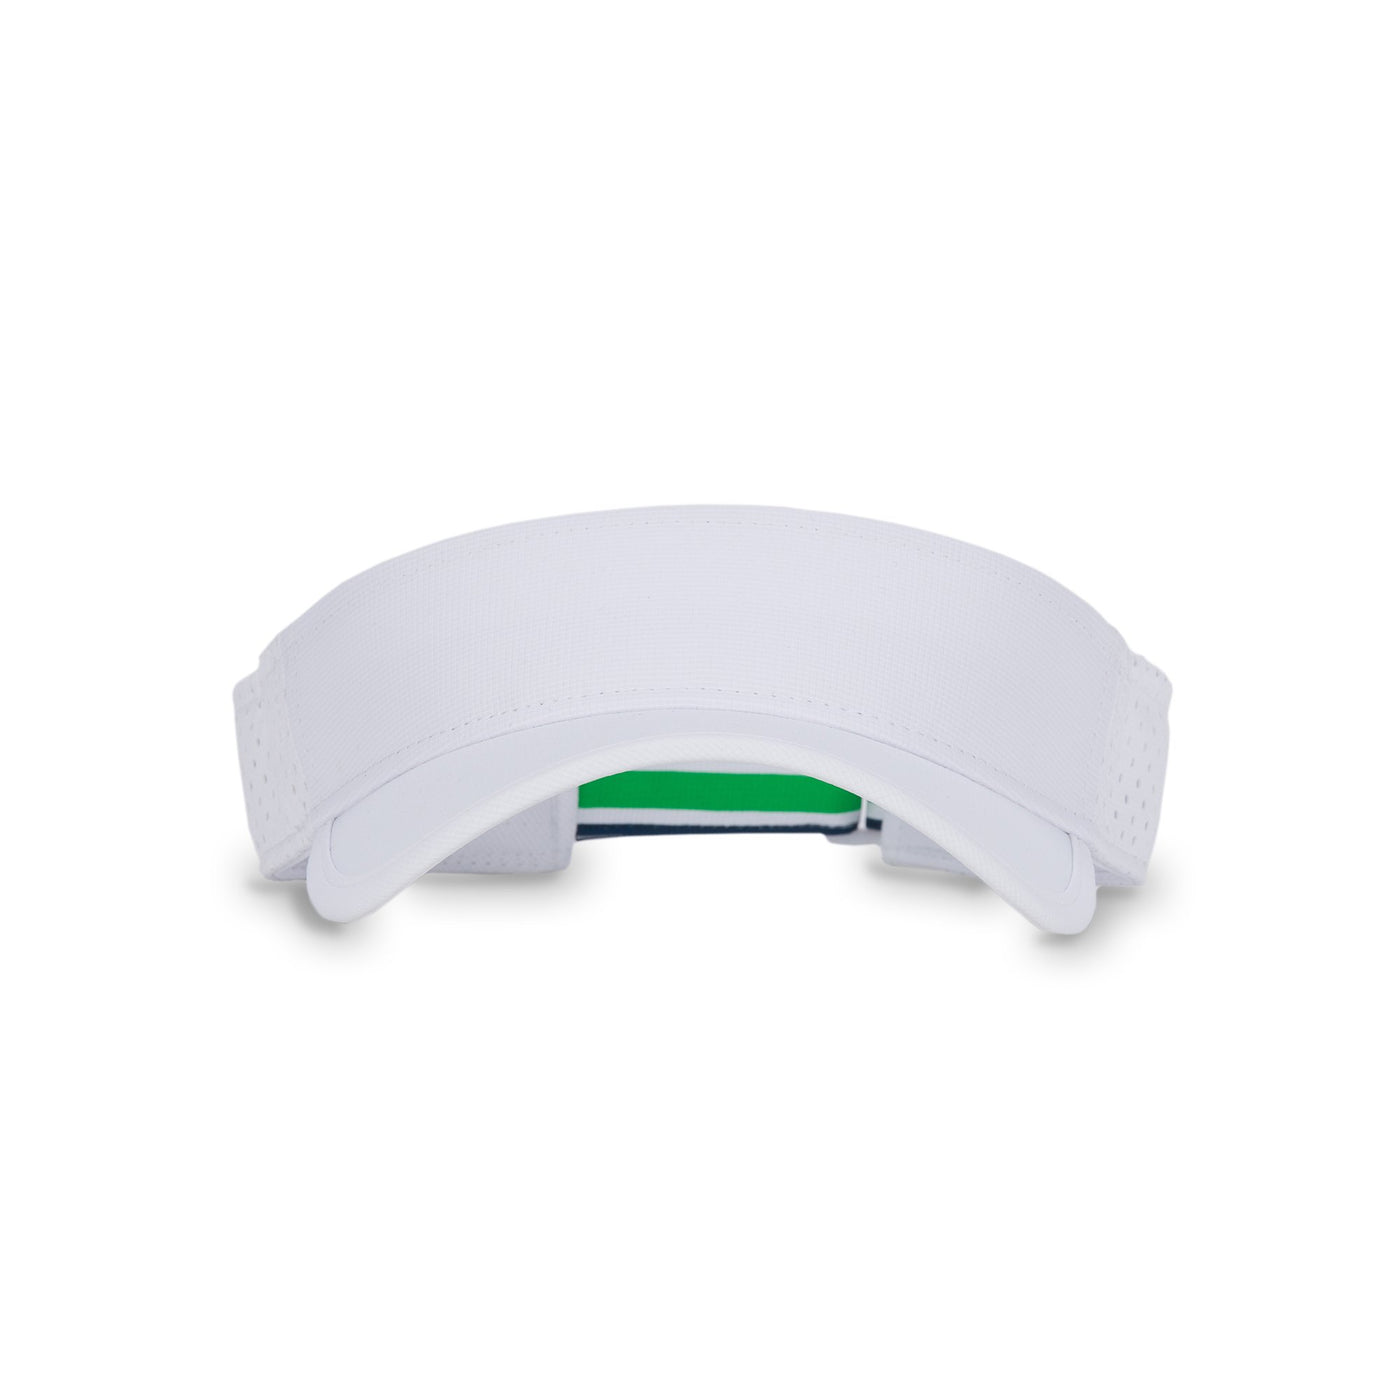 Front view of white visor with green and navy striped adjustable strap on the back.